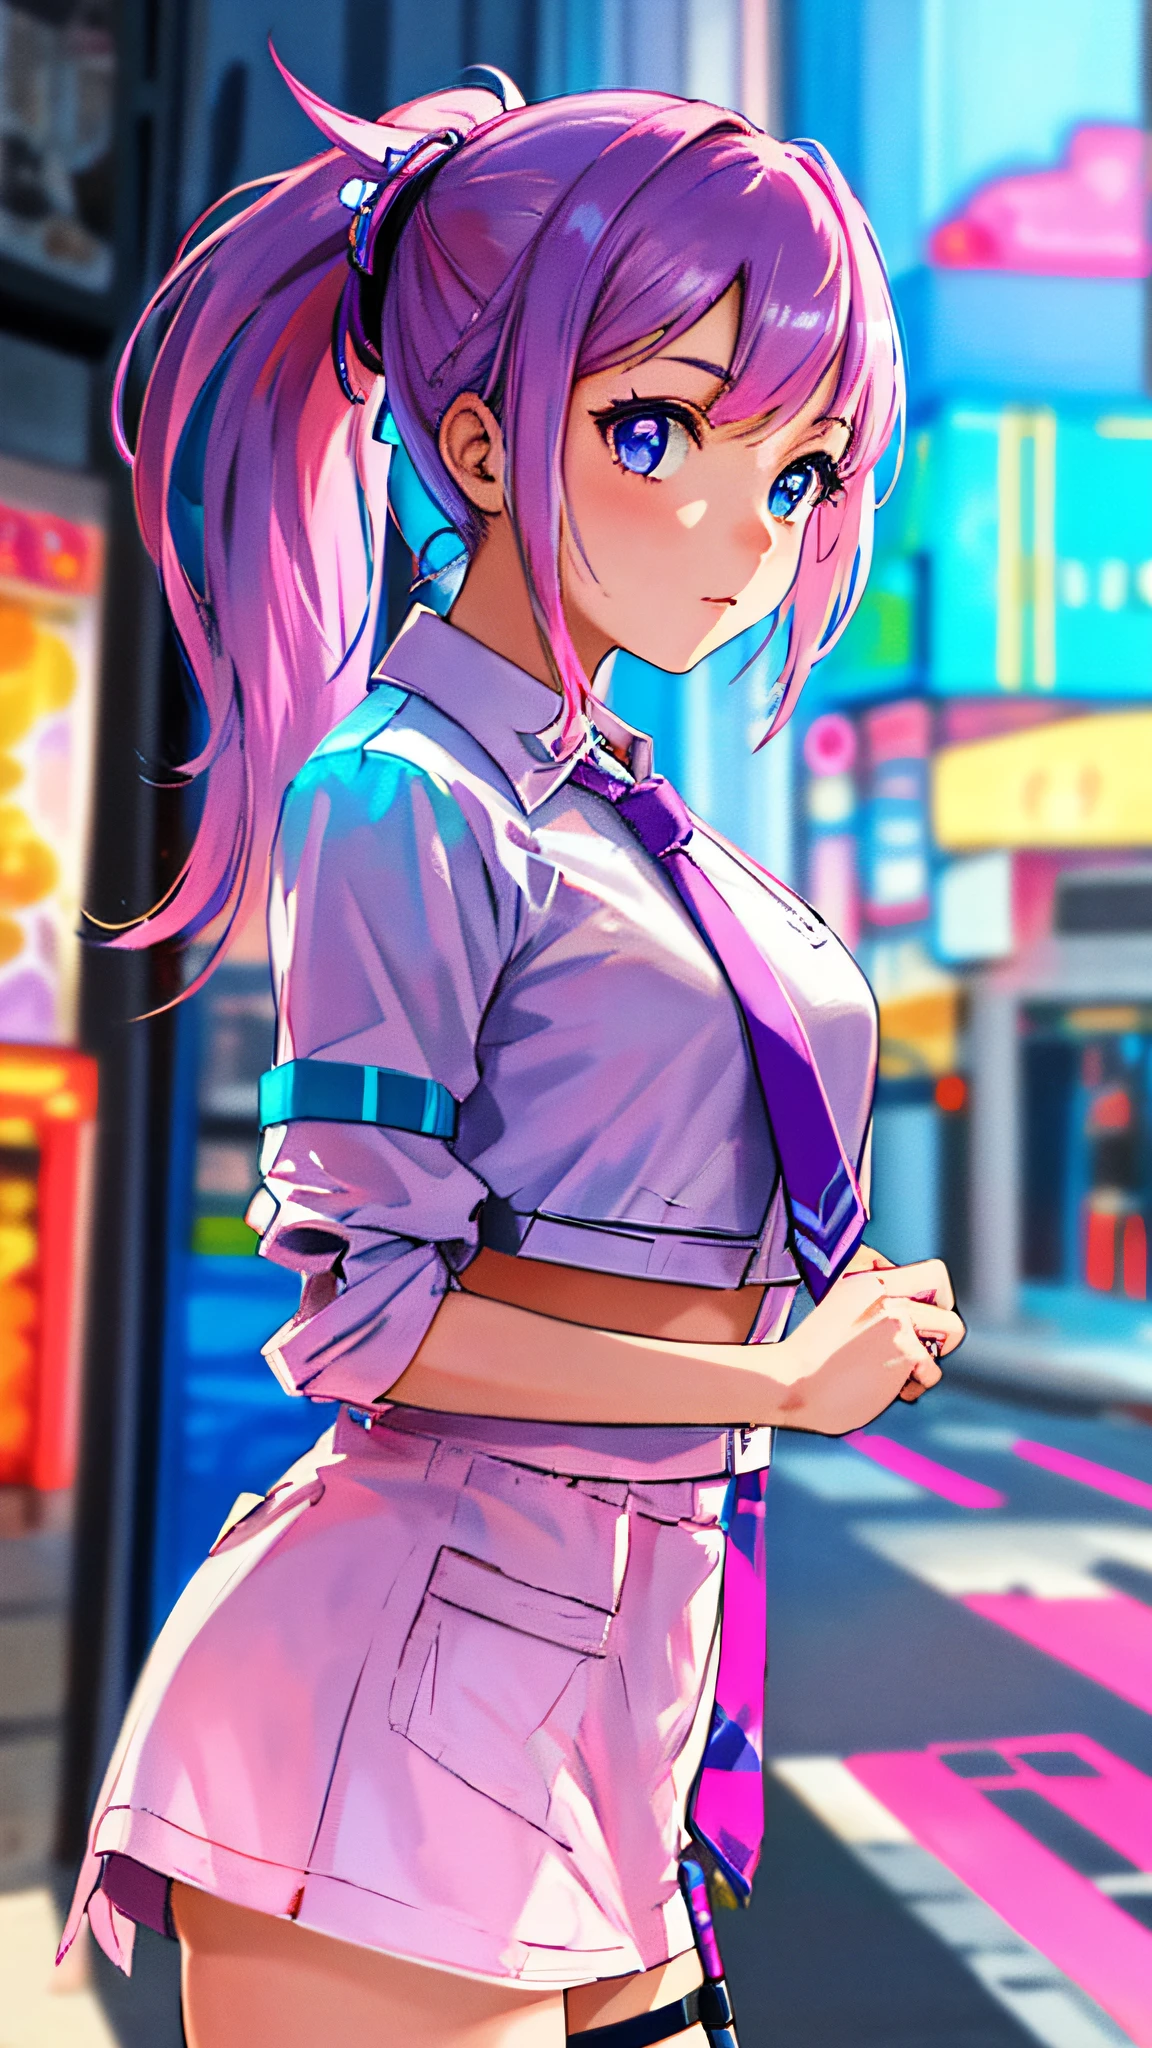 masterpiece, highest quality, realistic, subsurface scattering, chromatic lighting,

colorized, pink + white + purple + blue limited color palette, detailed concept drawing, line-art, illustration,

cyberpunk,
18yo 1girl, medium breasts,
extrovert,
ponytail hair, 
punk outfit,
necktie,
metallic,
America,
mall, 
sunny,
background